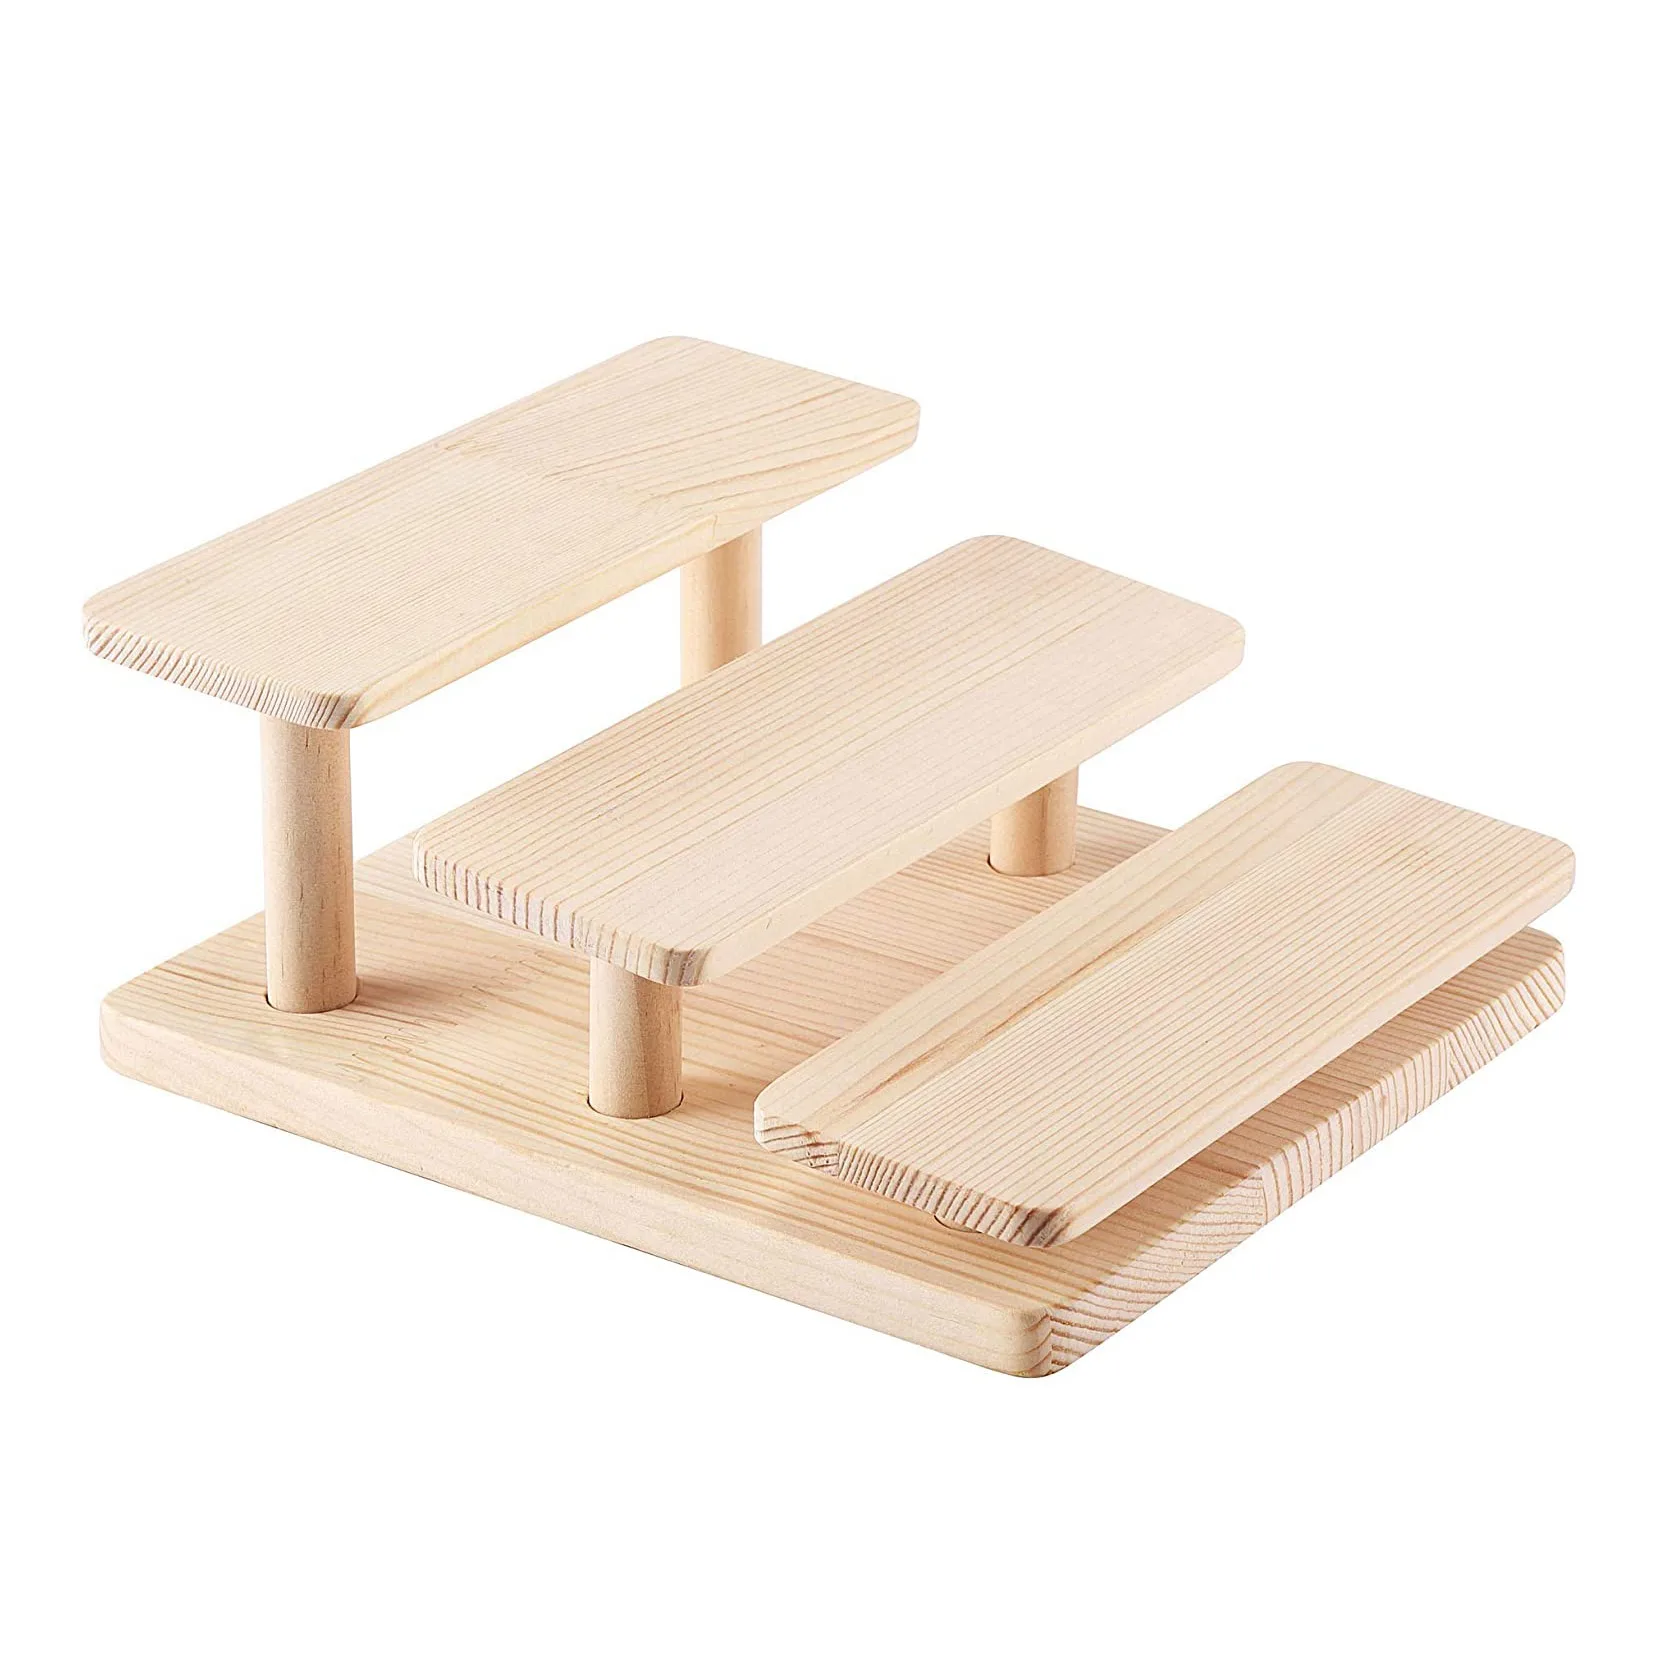 

Wooden Display Risers 3 Layers Glasses Display Stand Jewelry Holder Stand Wood Organizer Tray for Cabinet Desktop